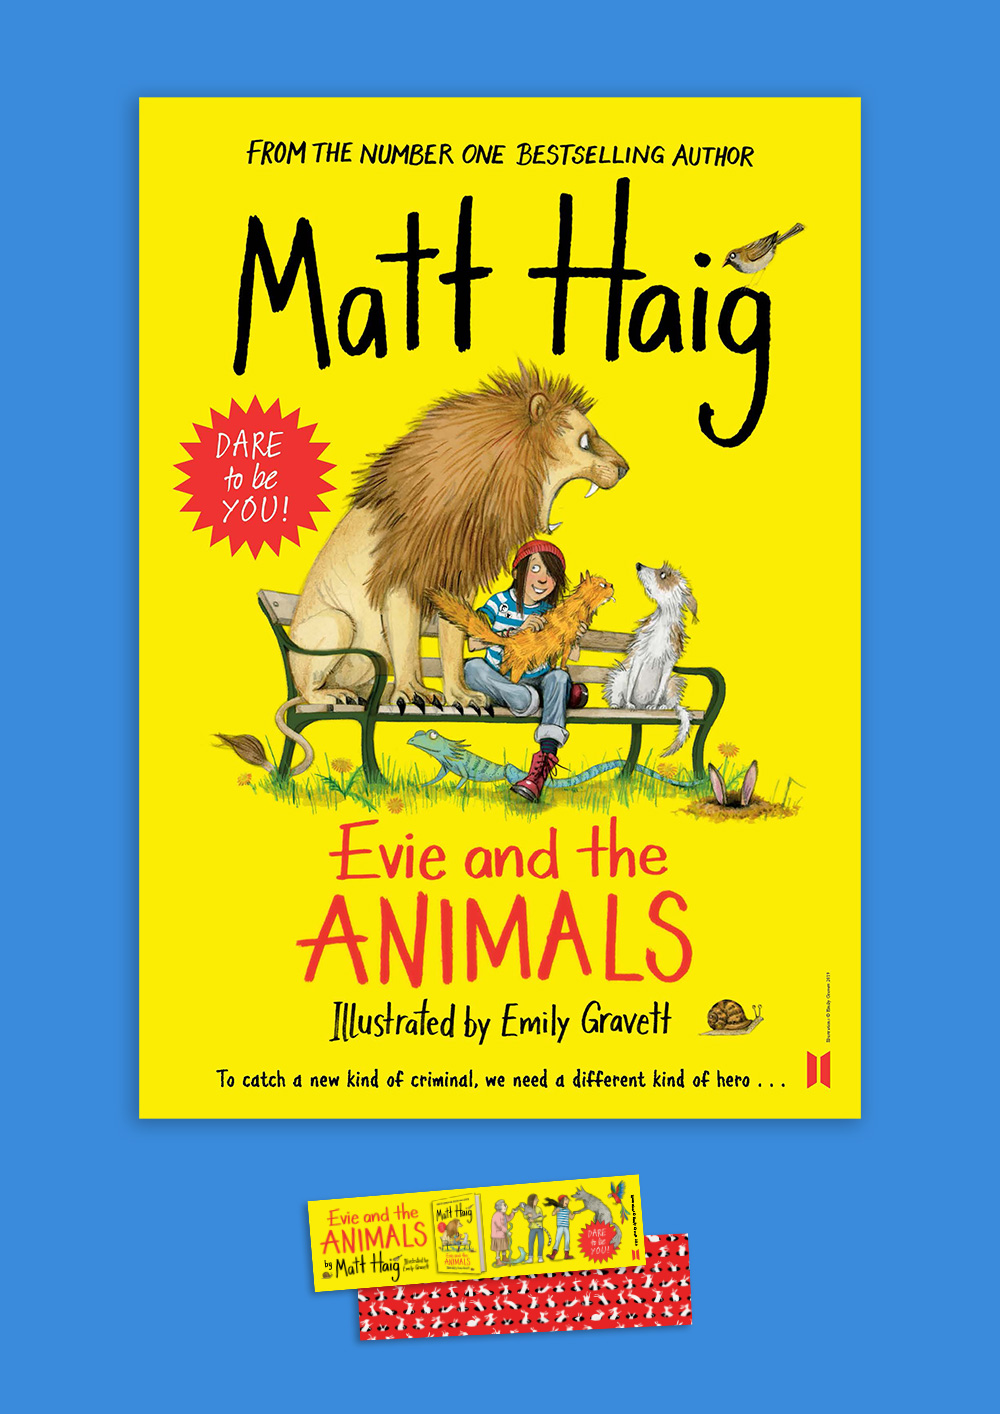 Download Evie and the Animals poster and bookmarks | Matt Haig's books for  children from Canongate